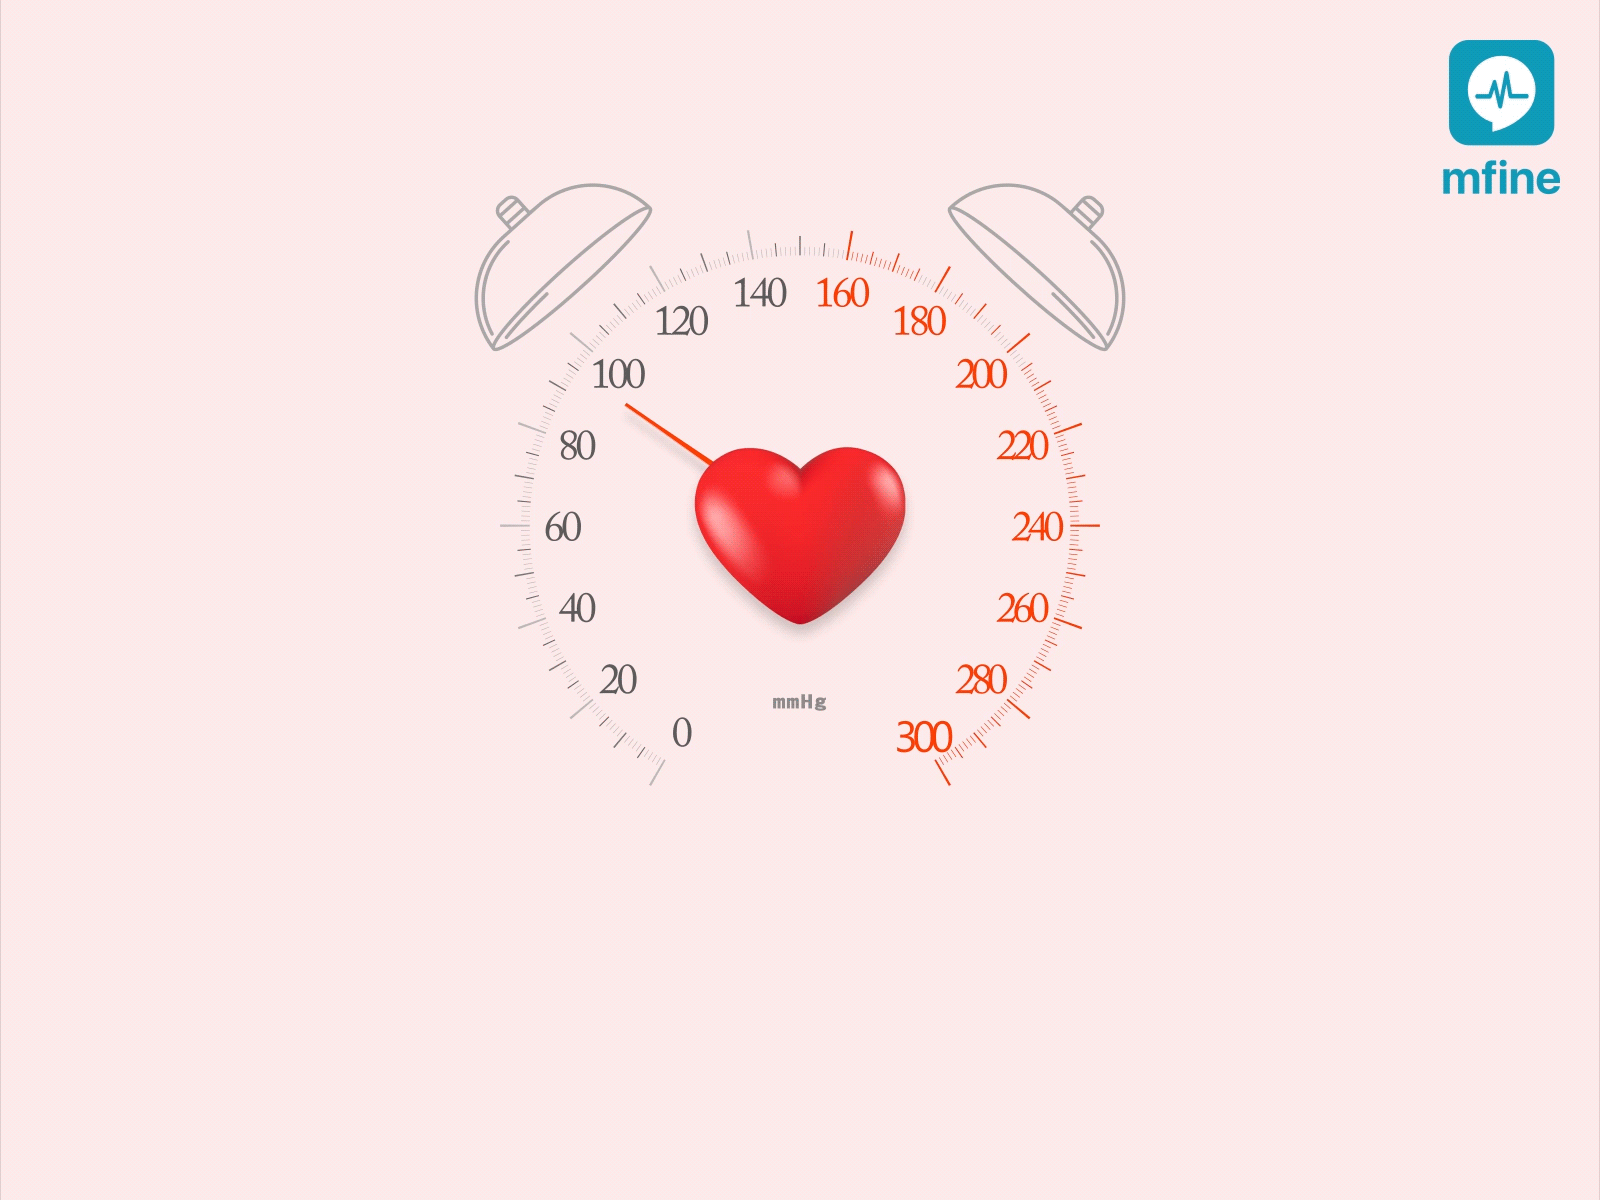 Cardiology - Super Speciality Ad ad advertising alarm blood pressure care clock concept consultation creative design doctor health heart heathcare minimalist online professional red